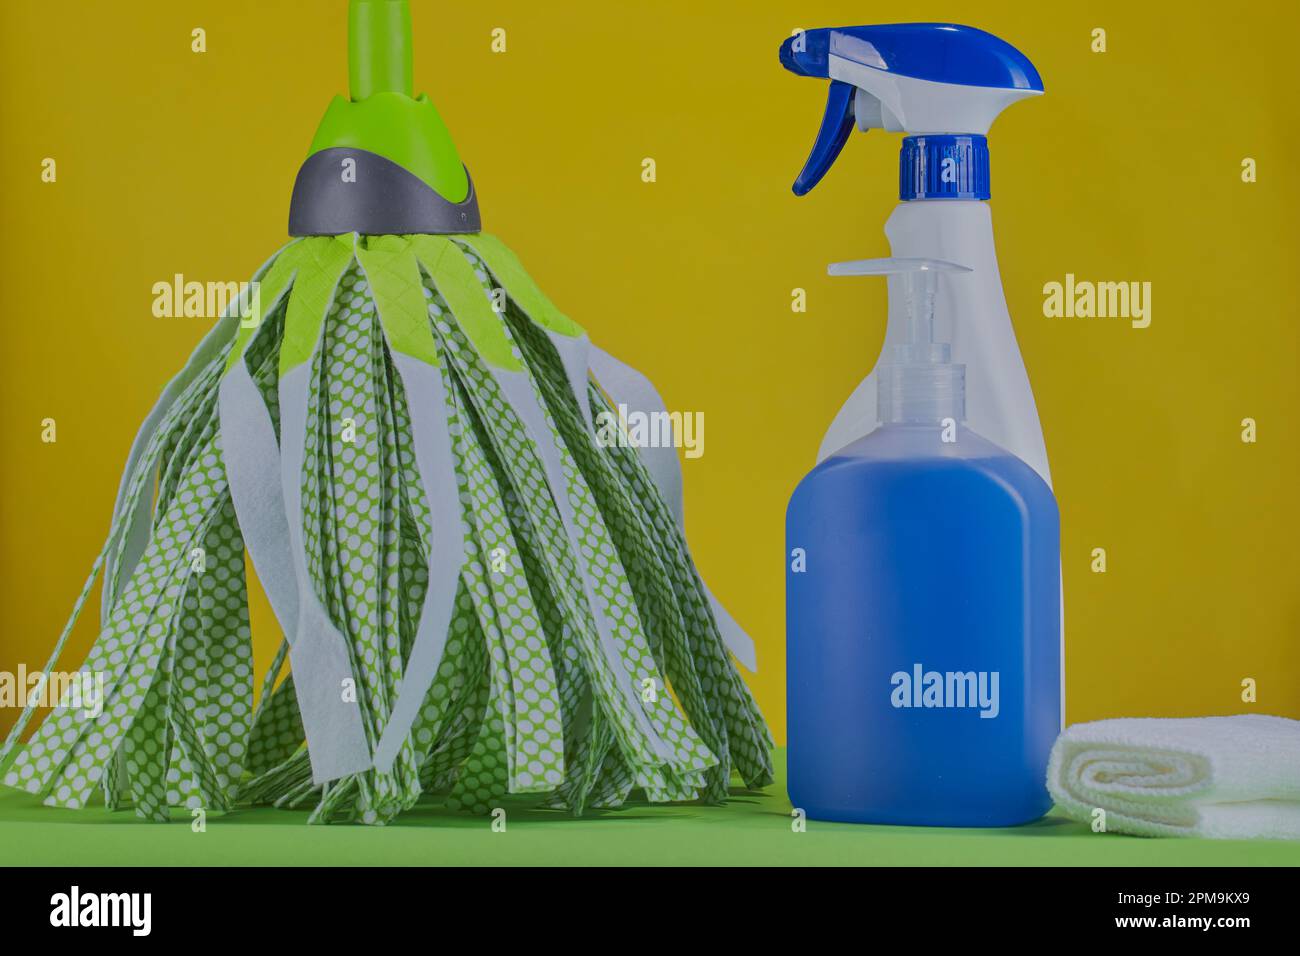 https://c8.alamy.com/comp/2PM9KX9/cleaning-products-a-mop-and-cleaning-spray-on-a-vibrant-yellow-background-2PM9KX9.jpg